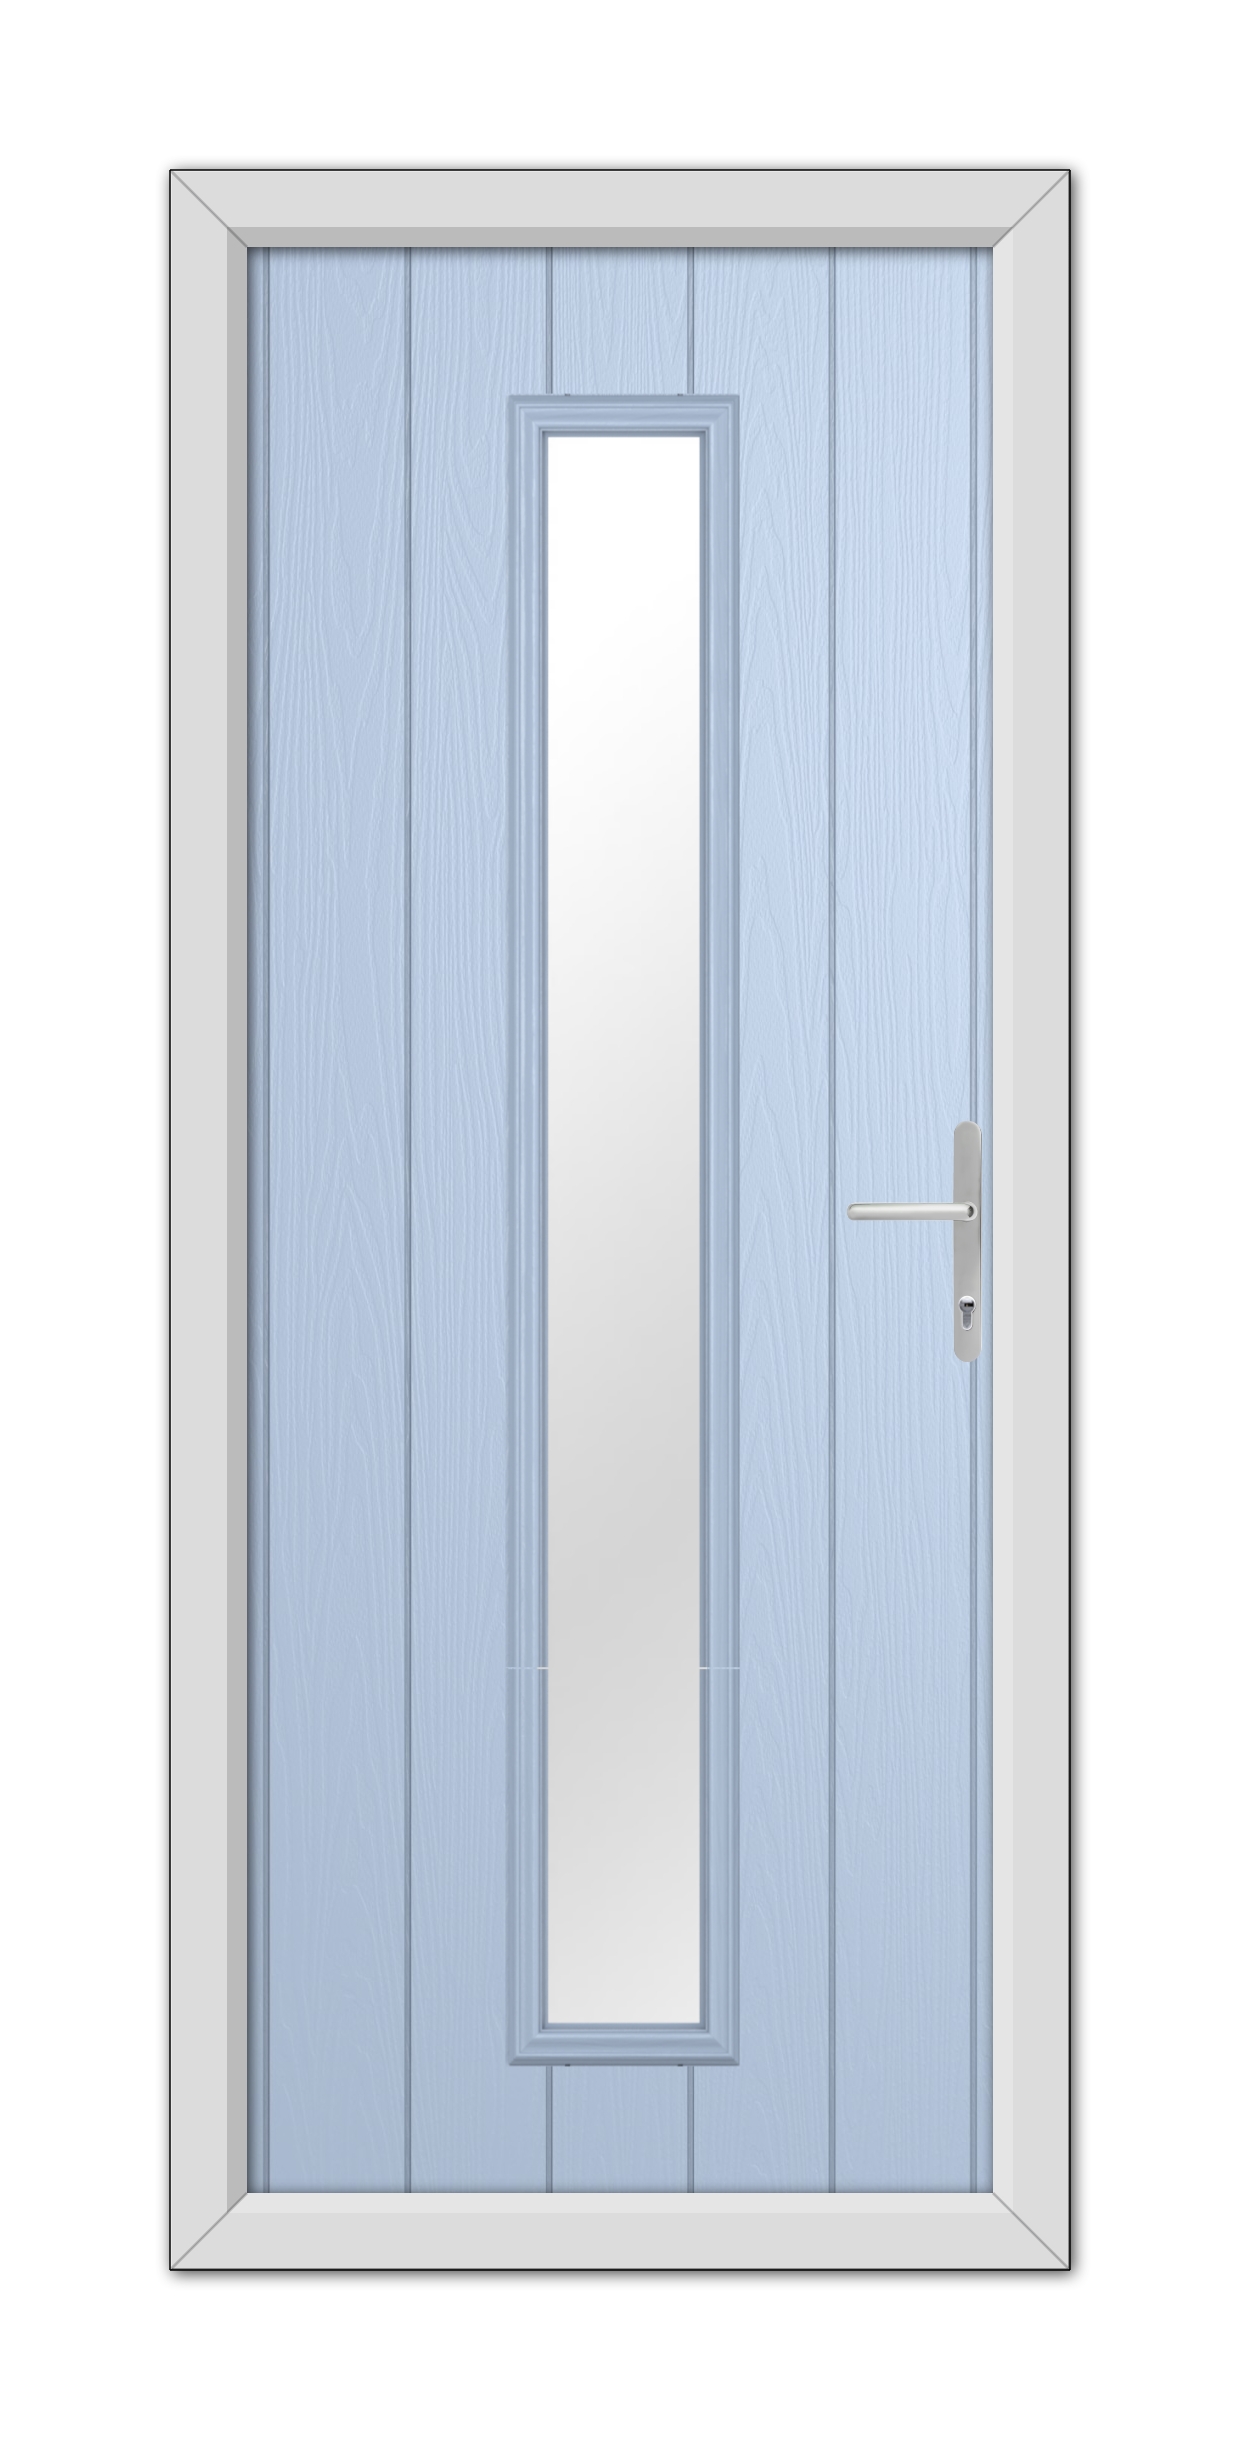 A Duck Egg Blue Rutland Composite Door 48mm Timber Core with a vertical glass panel and modern silver handle, set within a white frame.